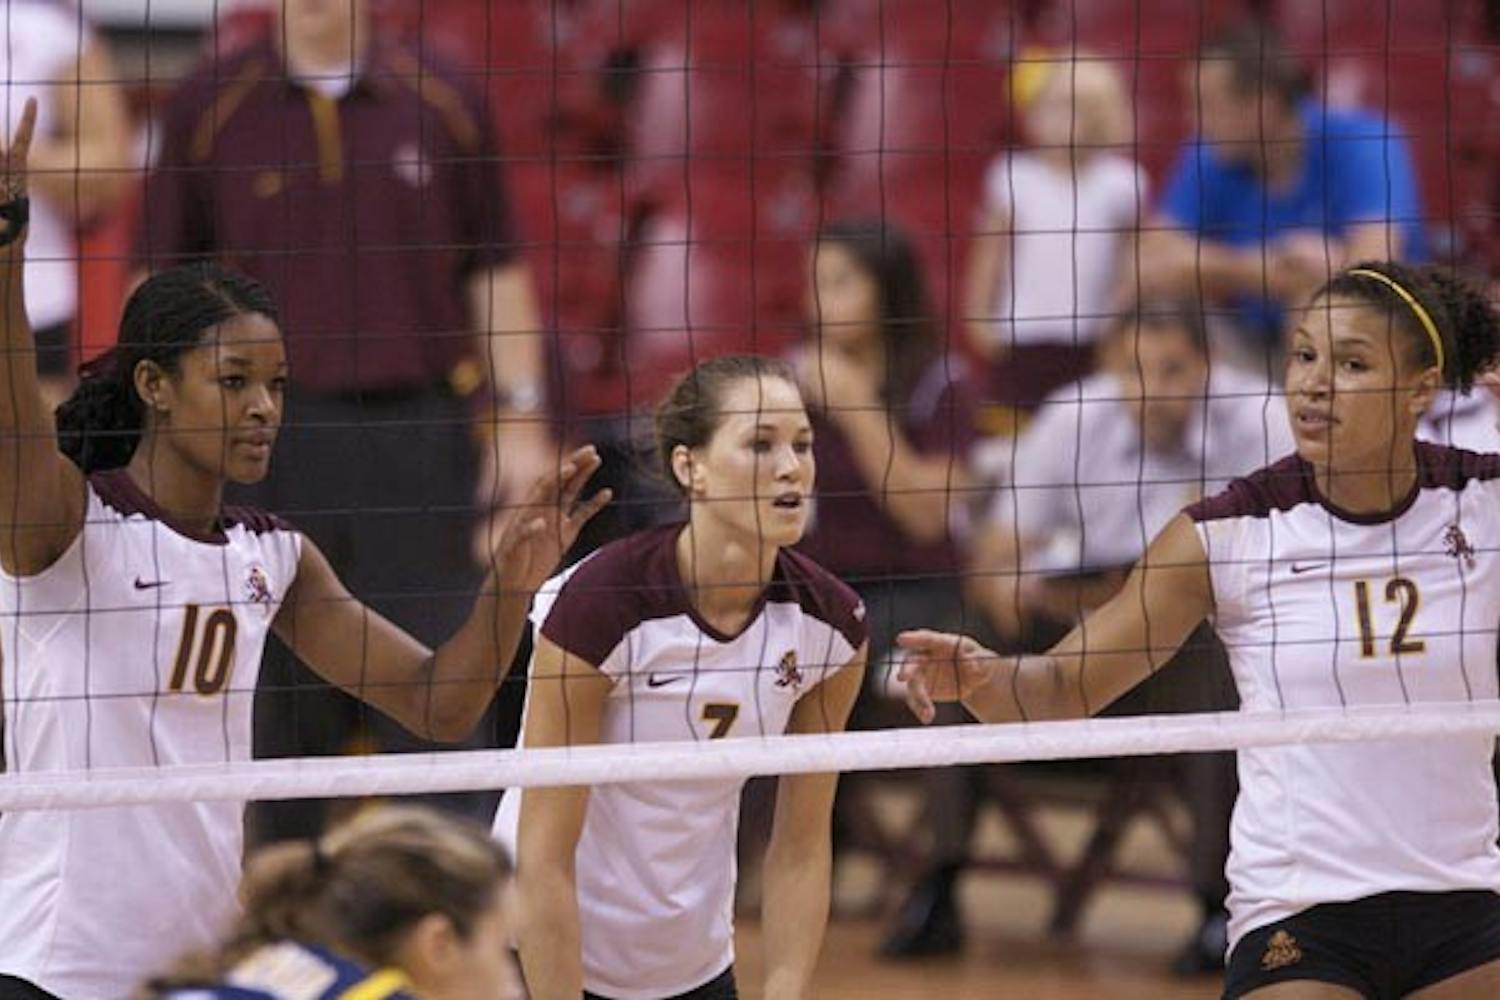 TALENTED TRIO: Sophomore outside hitter Erica Wilson, junior setter Cat Highmark and senior outside hitter Sarah Reaves adjust between sets during a recent tournament. ASU looks to collect its first Pac-10 win in Washington this weekend. (Photo by Scott Stuk)